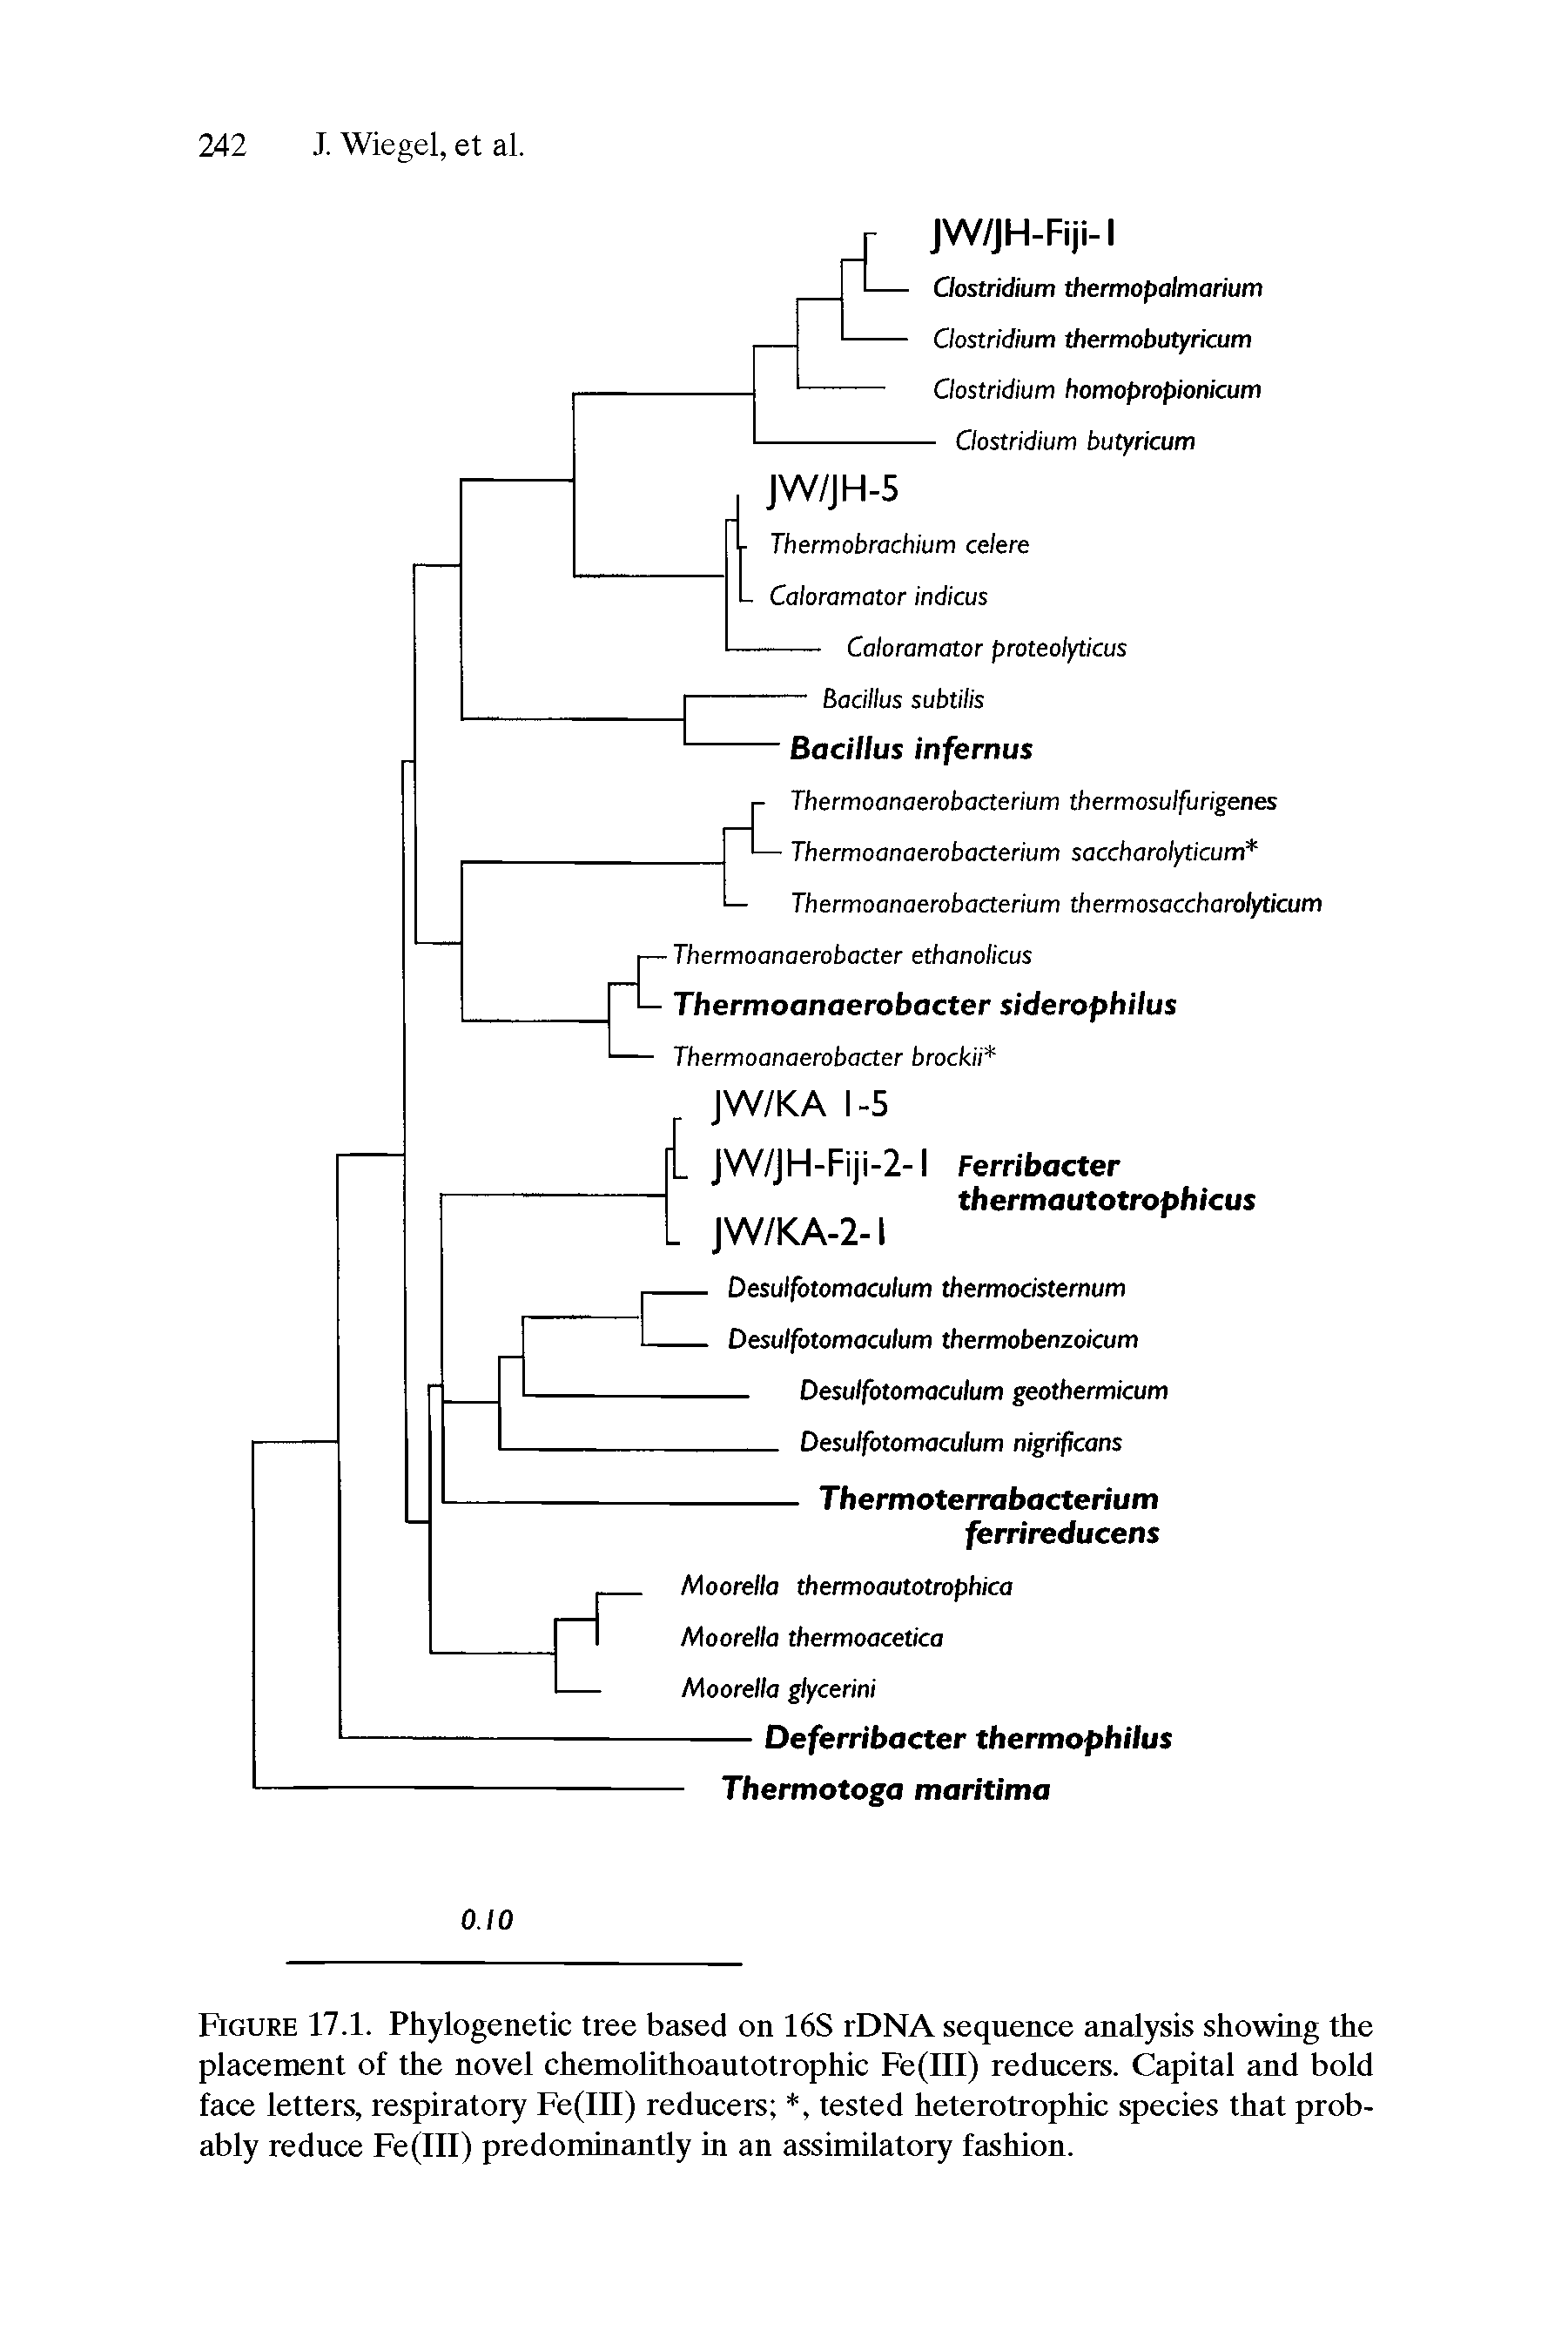 Figure 17.1. Phylogenetic tree based on 16S rDNA sequence analysis showing the placement of the novel chemolithoautotrophic Fe(III) reducers. Capital and bold face letters, respiratory Fe(III) reducers , tested heterotrophic species that probably reduce Fe(III) predominantly in an assimilatory fashion.